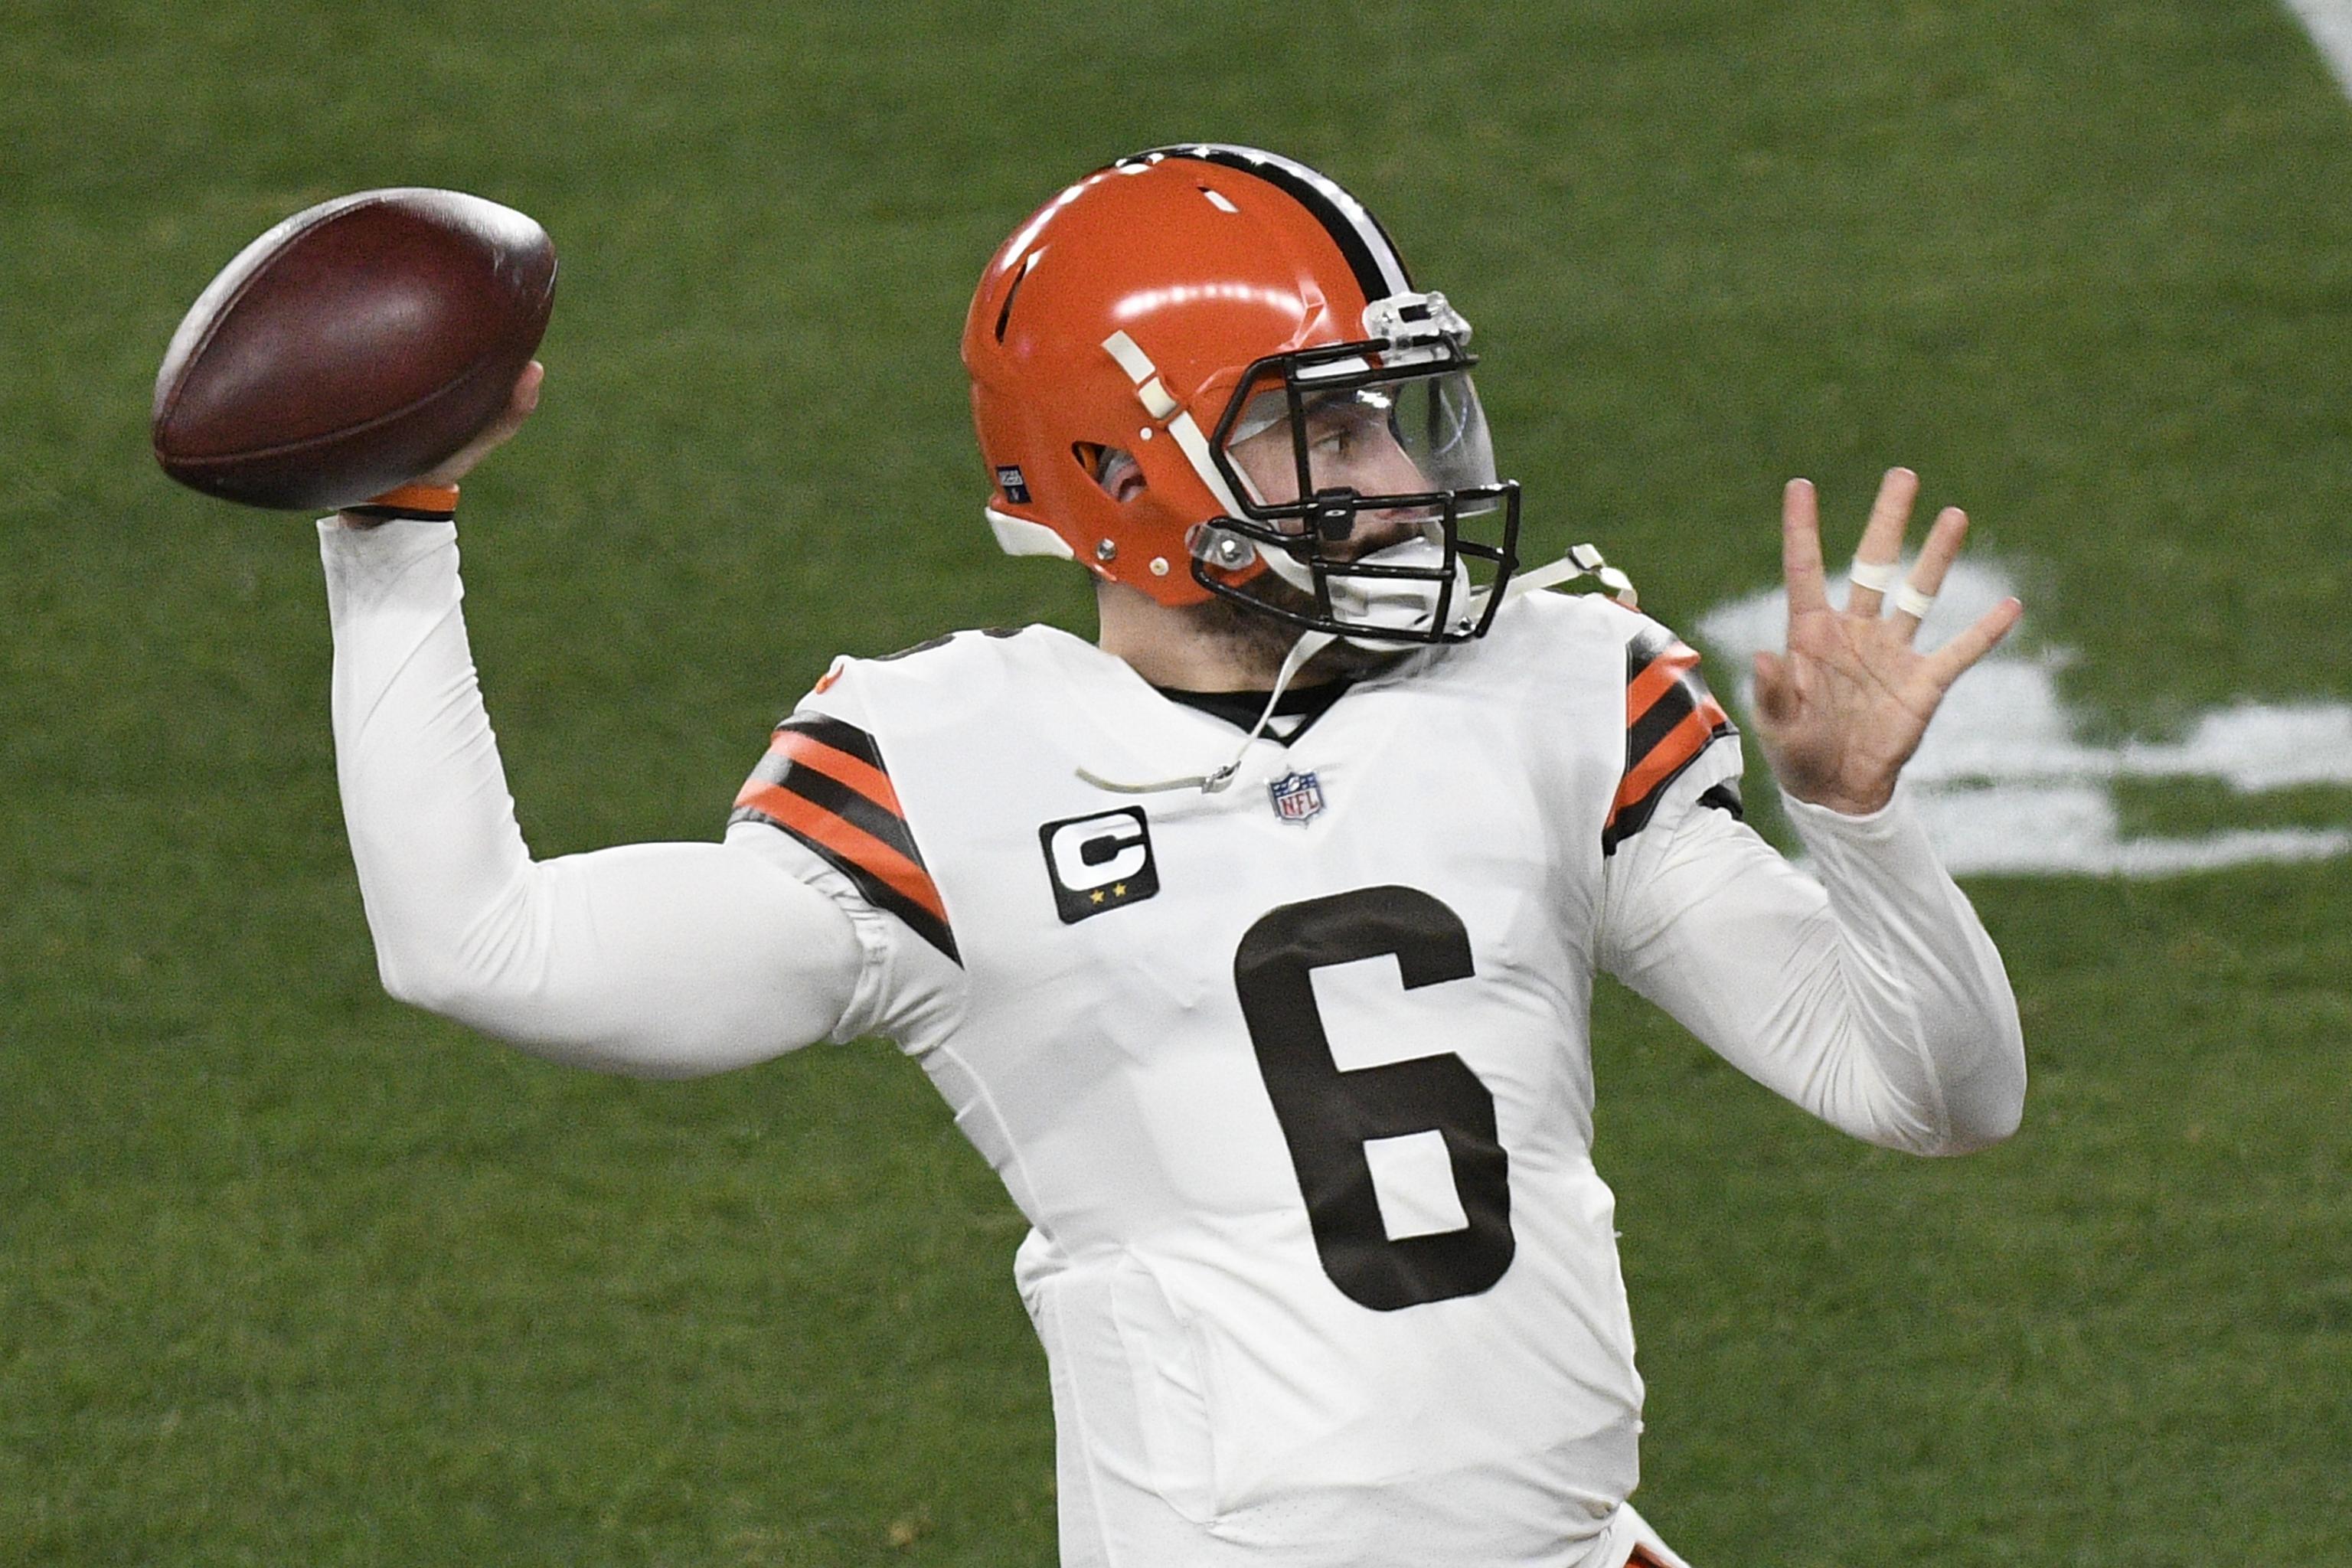 The Cleveland Browns can put the Pittsburgh Steelers in an early hole with  a win on Monday night, Associated Press